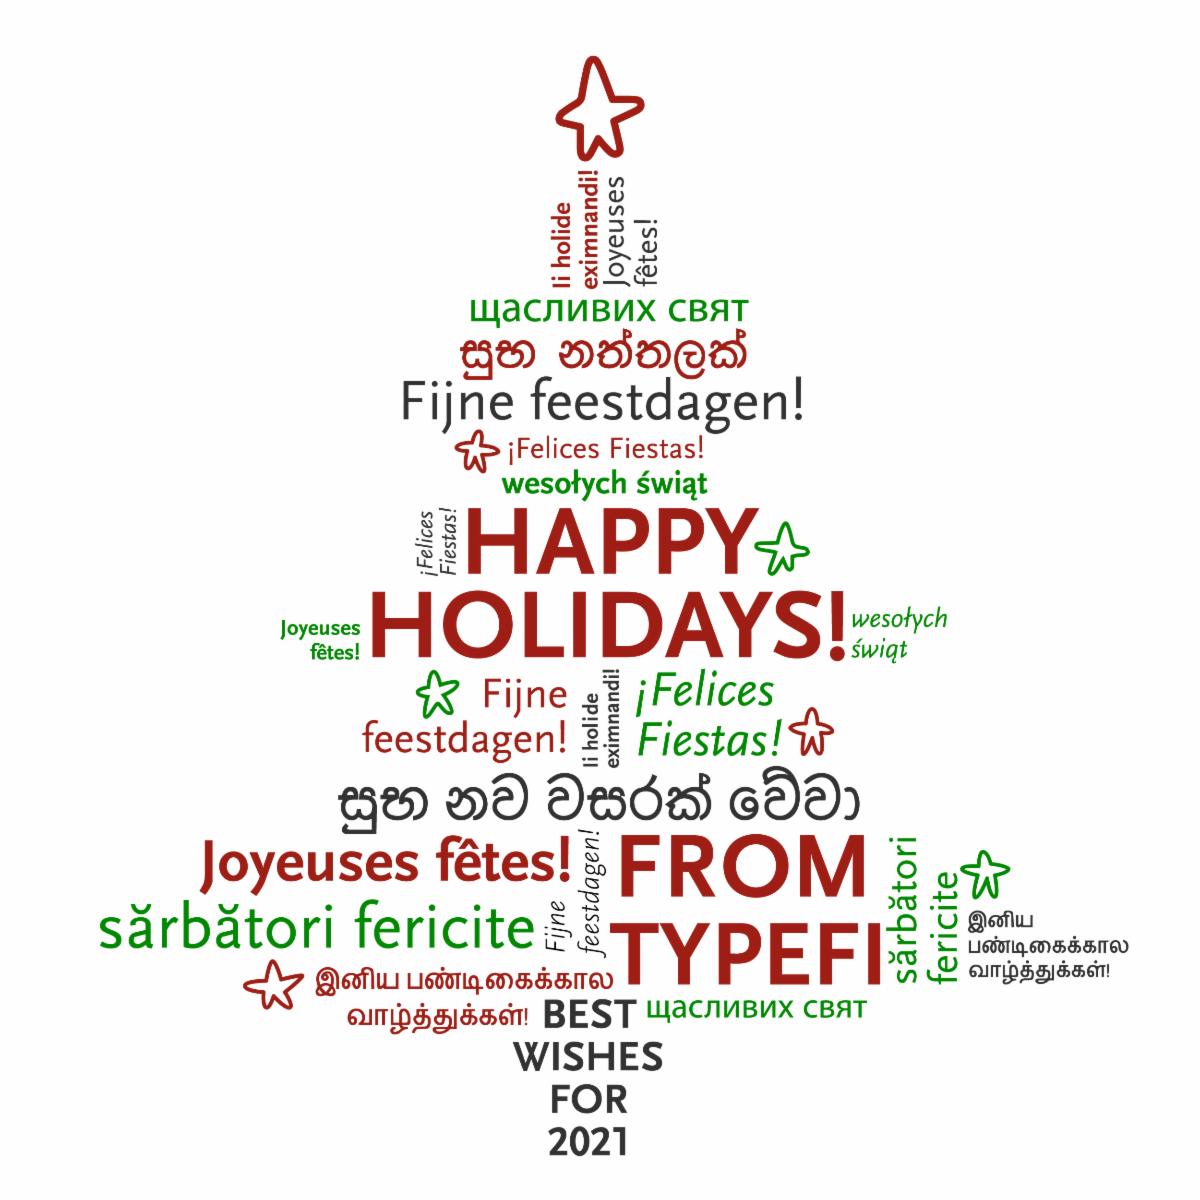 A fir tree made of words, including festive greetings in many languages. The words 'Happy holidays from Typefi, best wishes for 2021' stand out.